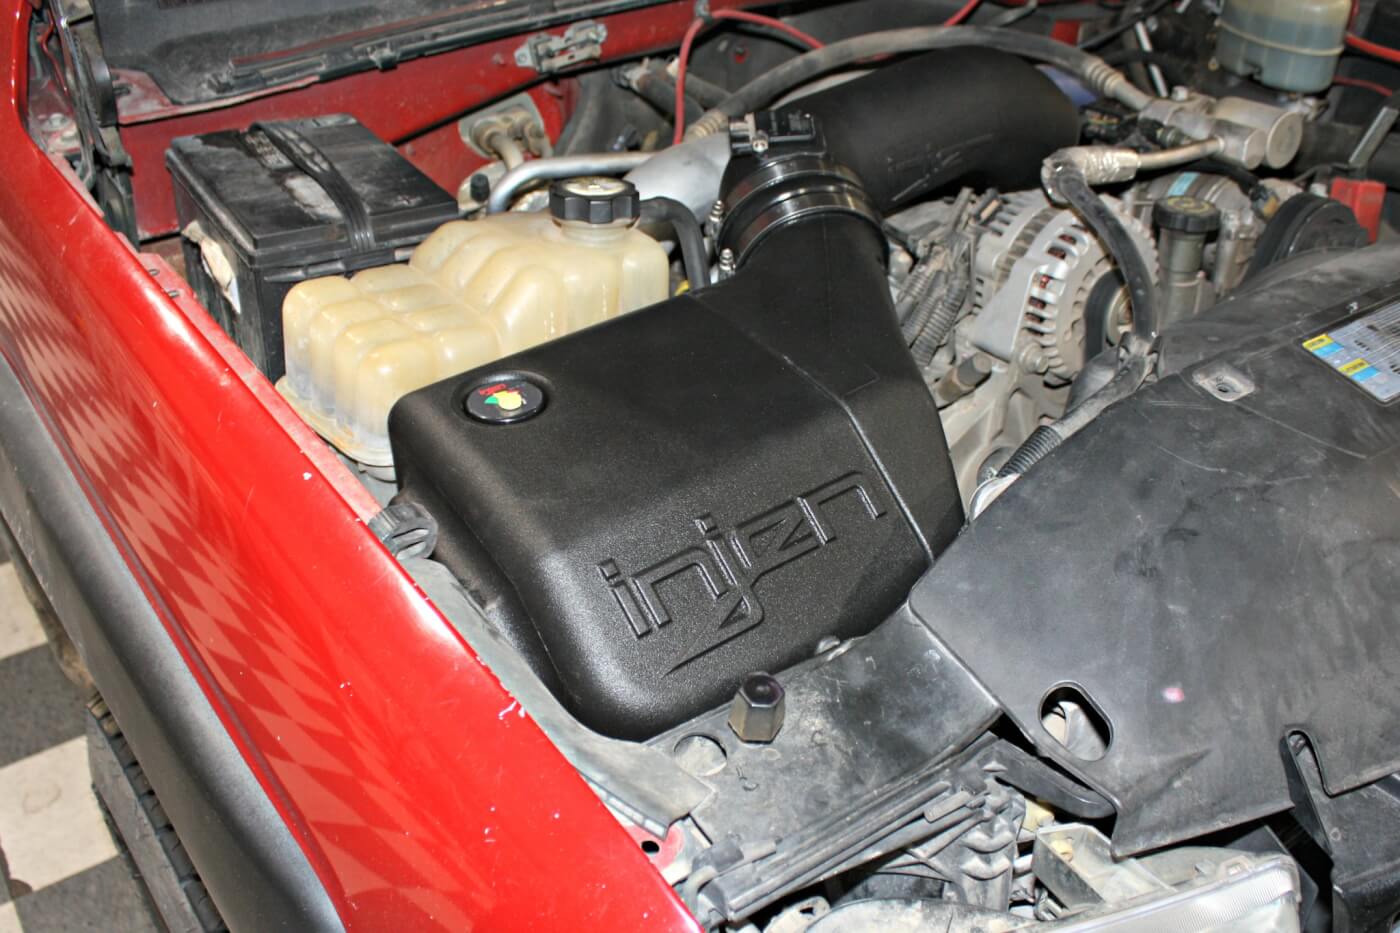 The completed Evolution induction system has near perfect fit and finish. The closed sealed box will help keep under hood temperatures from reaching the filter and the easy to read filter minder lets owners know when a filter cleaning is needed. Injen’s chassis dyno testing showed 21 hp and 46 lb-ft torque gained on an otherwise stock LB7.